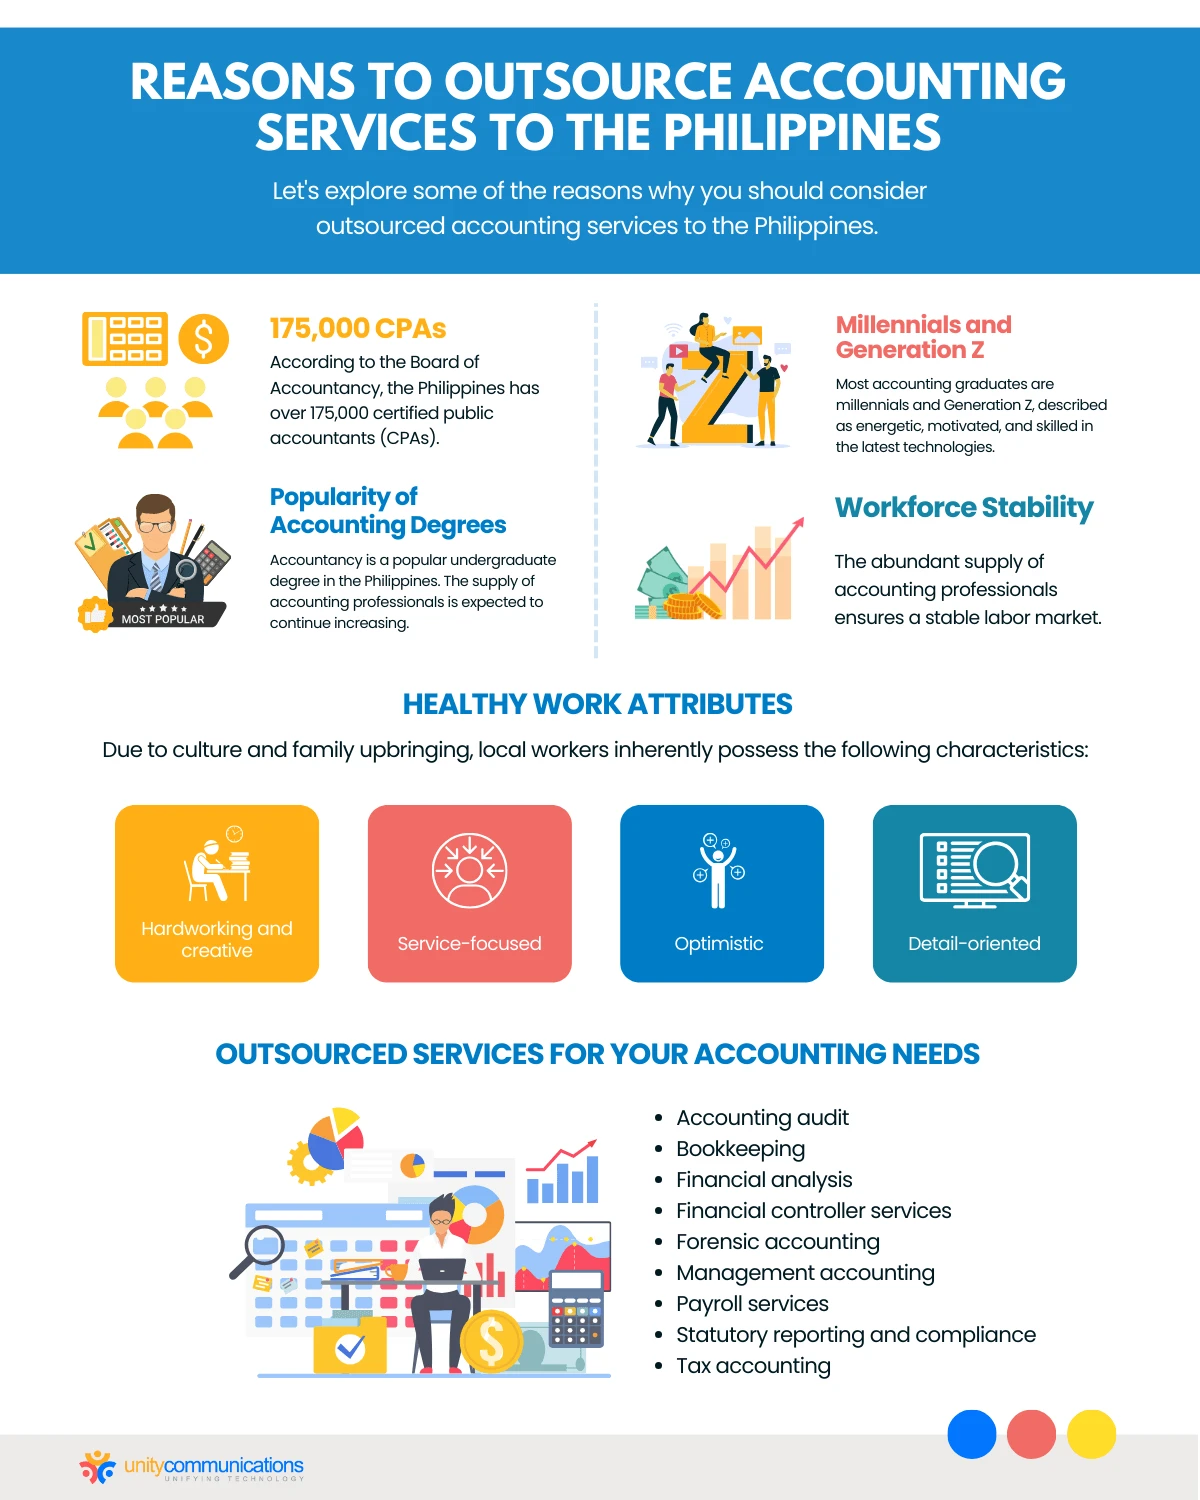 Reasons To Outsource Accounting Services to the Philippines